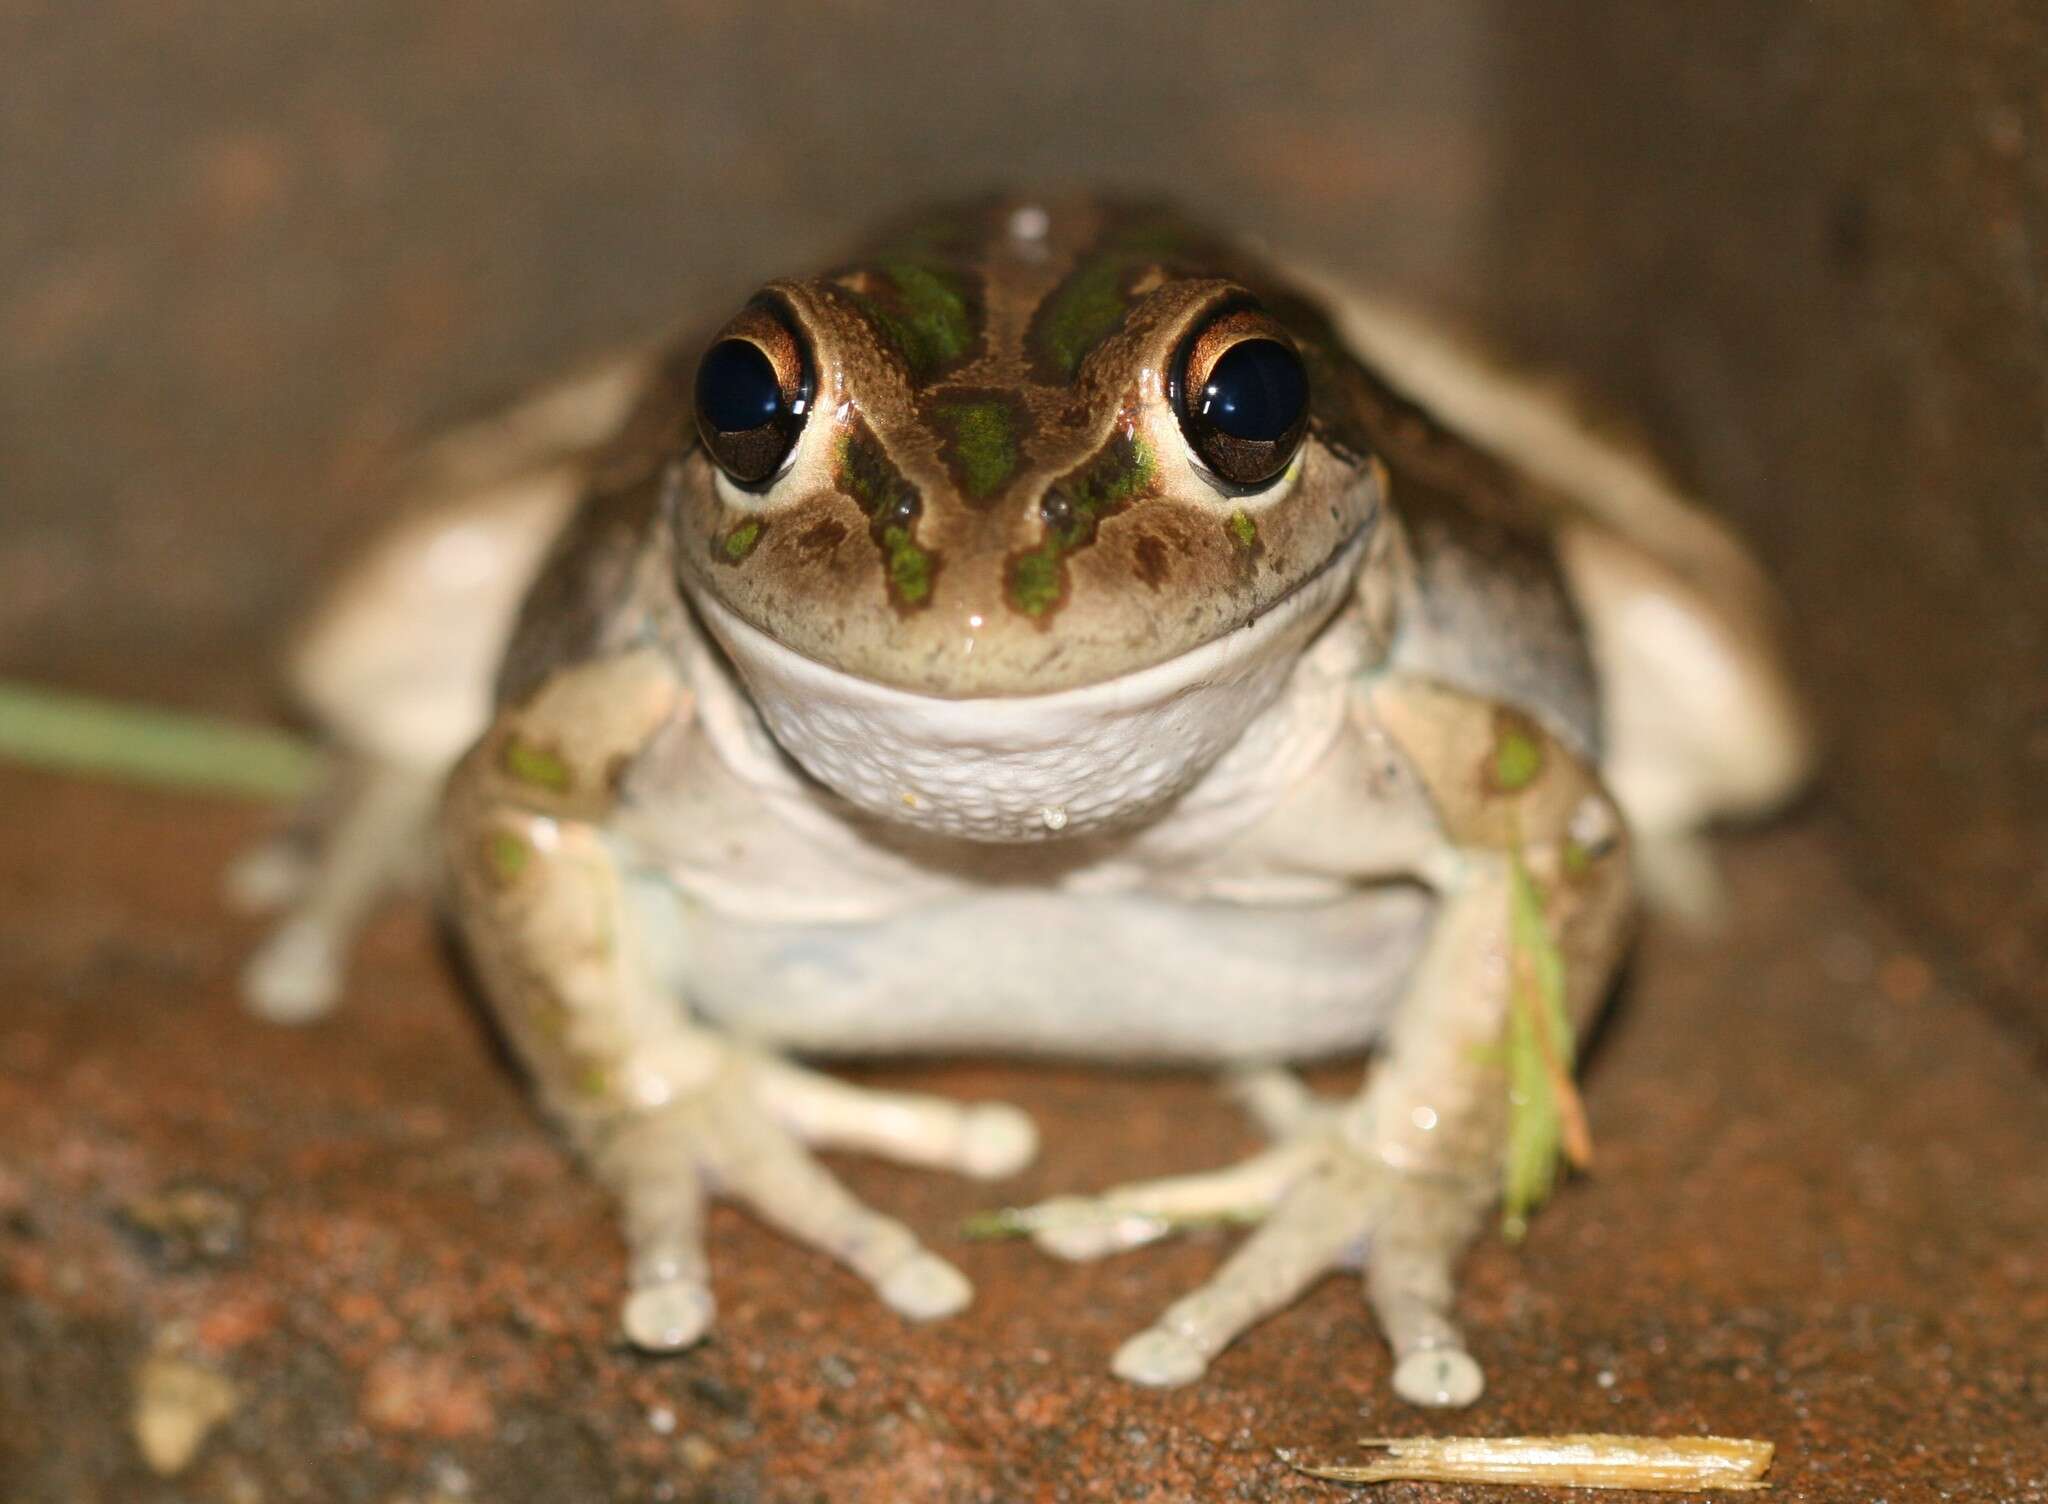 Image of Bell Frog